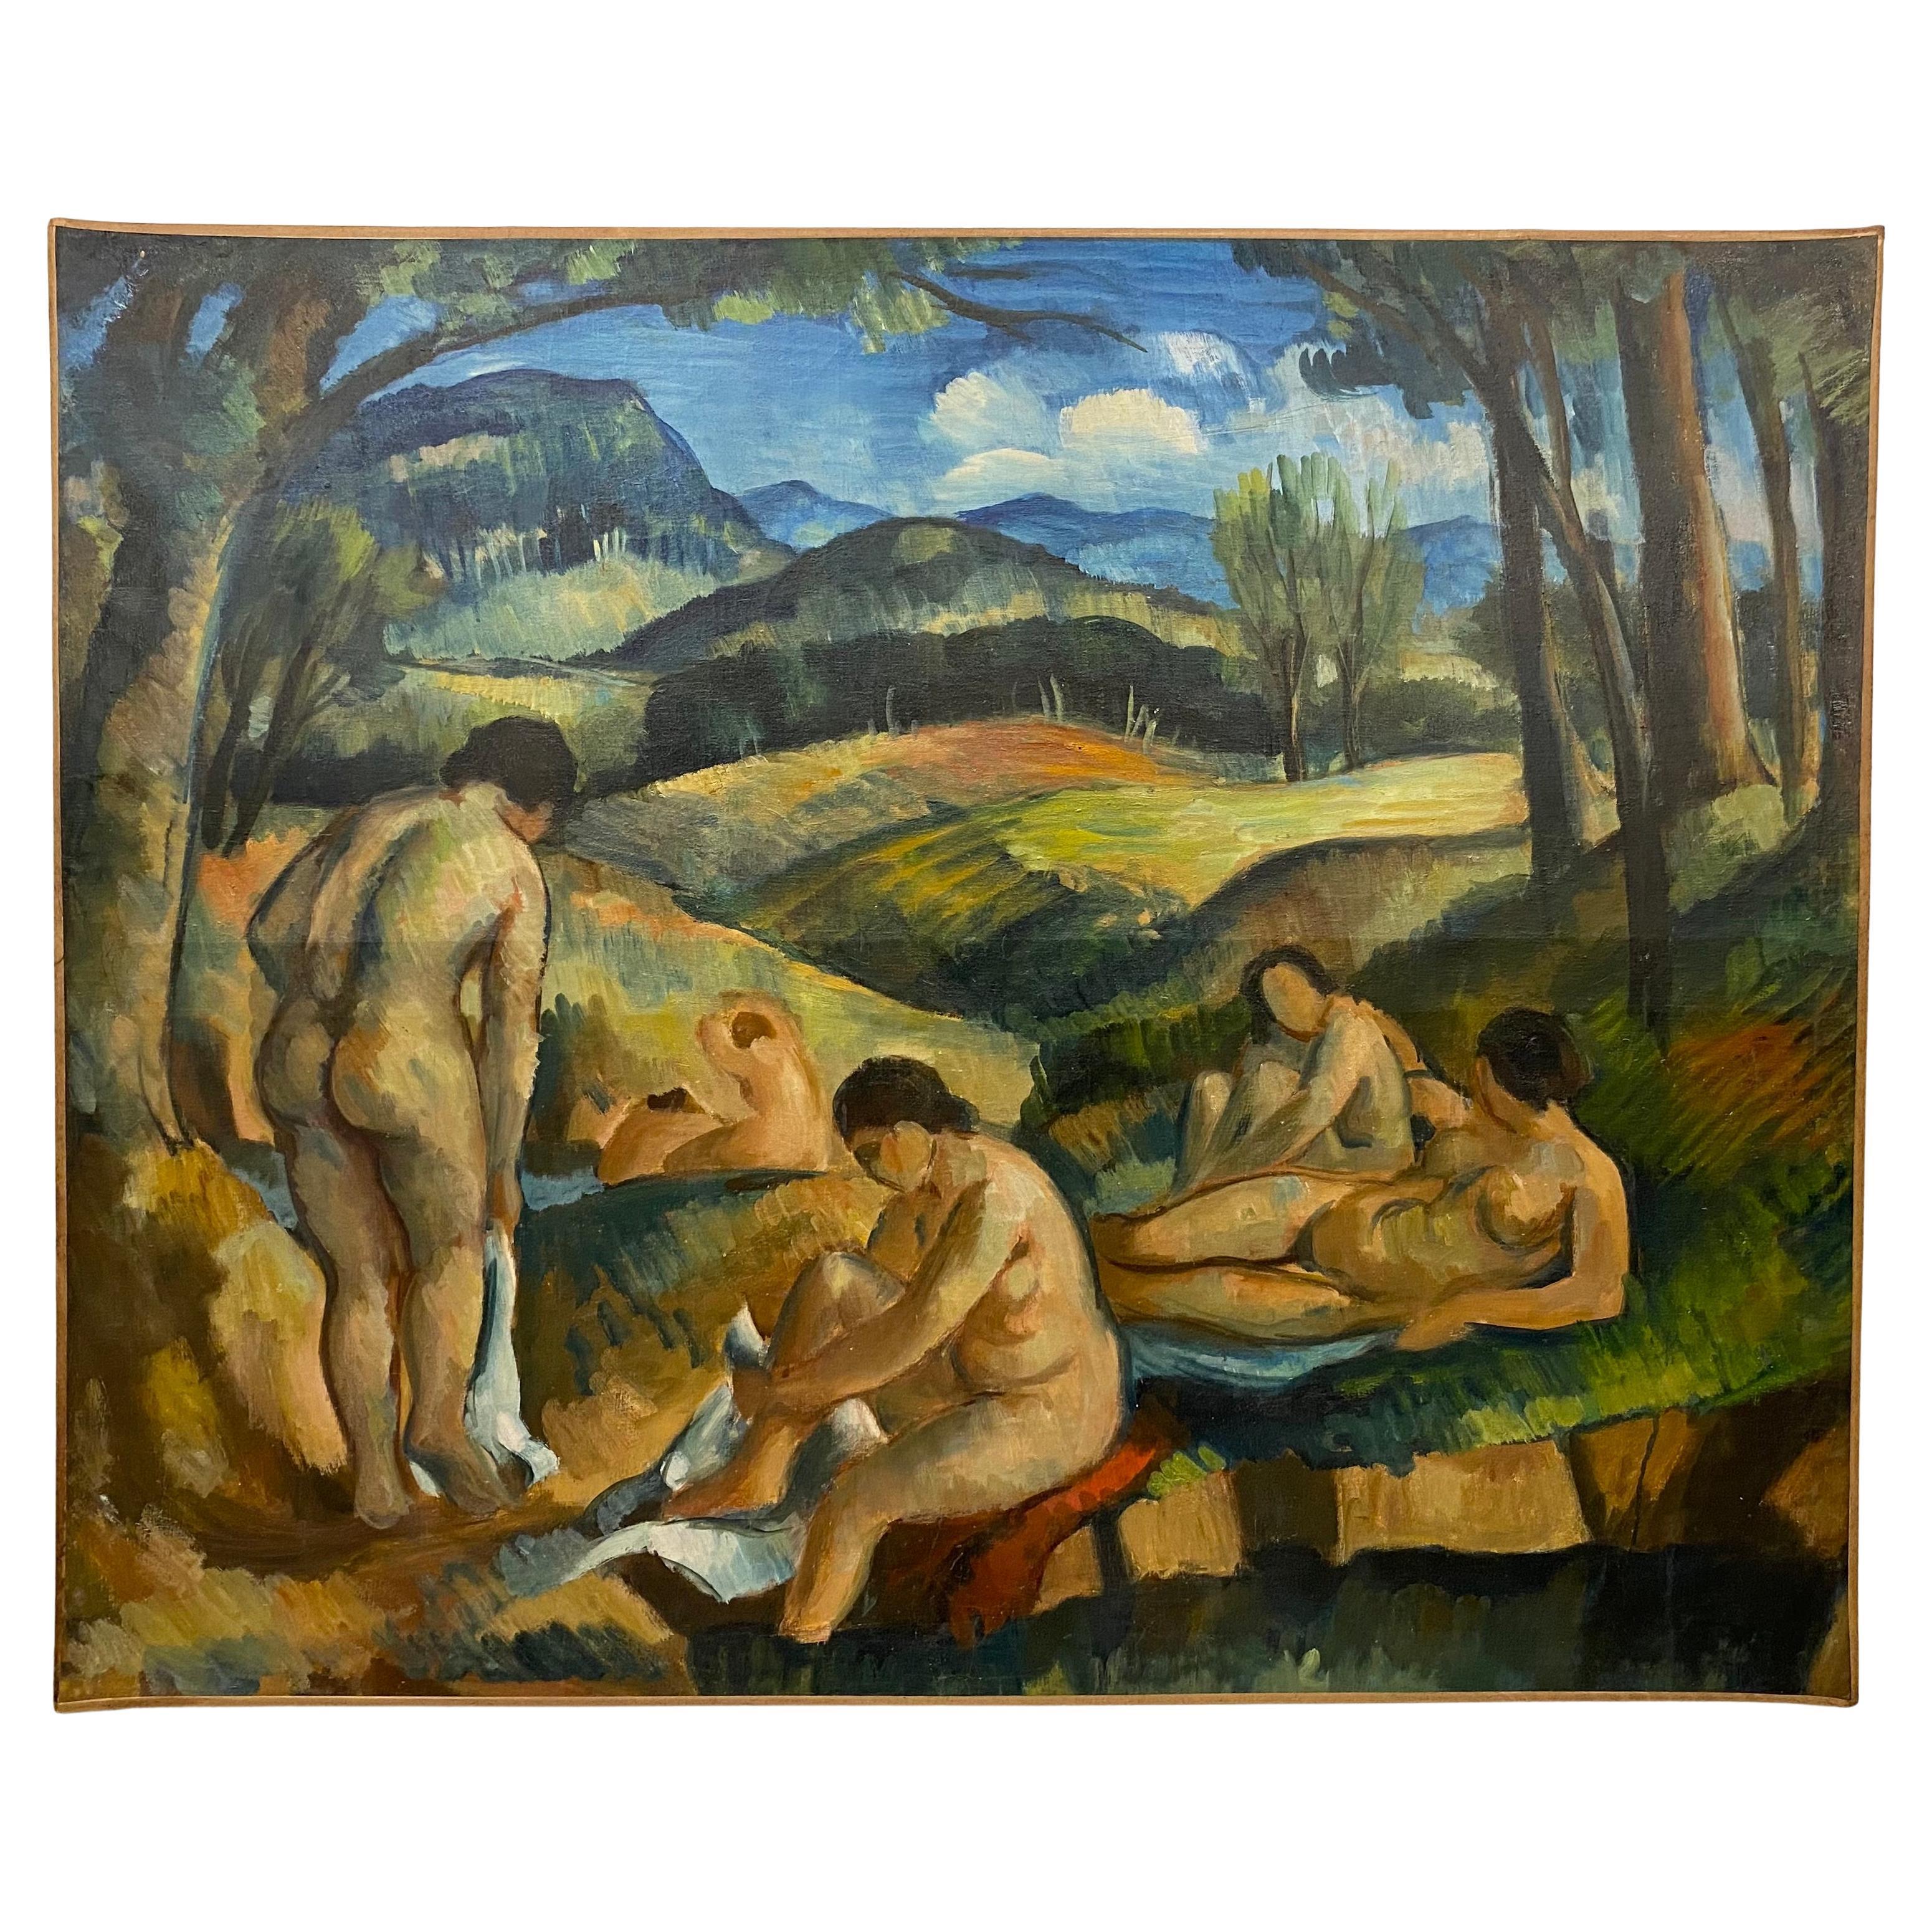 The Bathers Painting in the Manner of Paul Cezanne (en anglais)